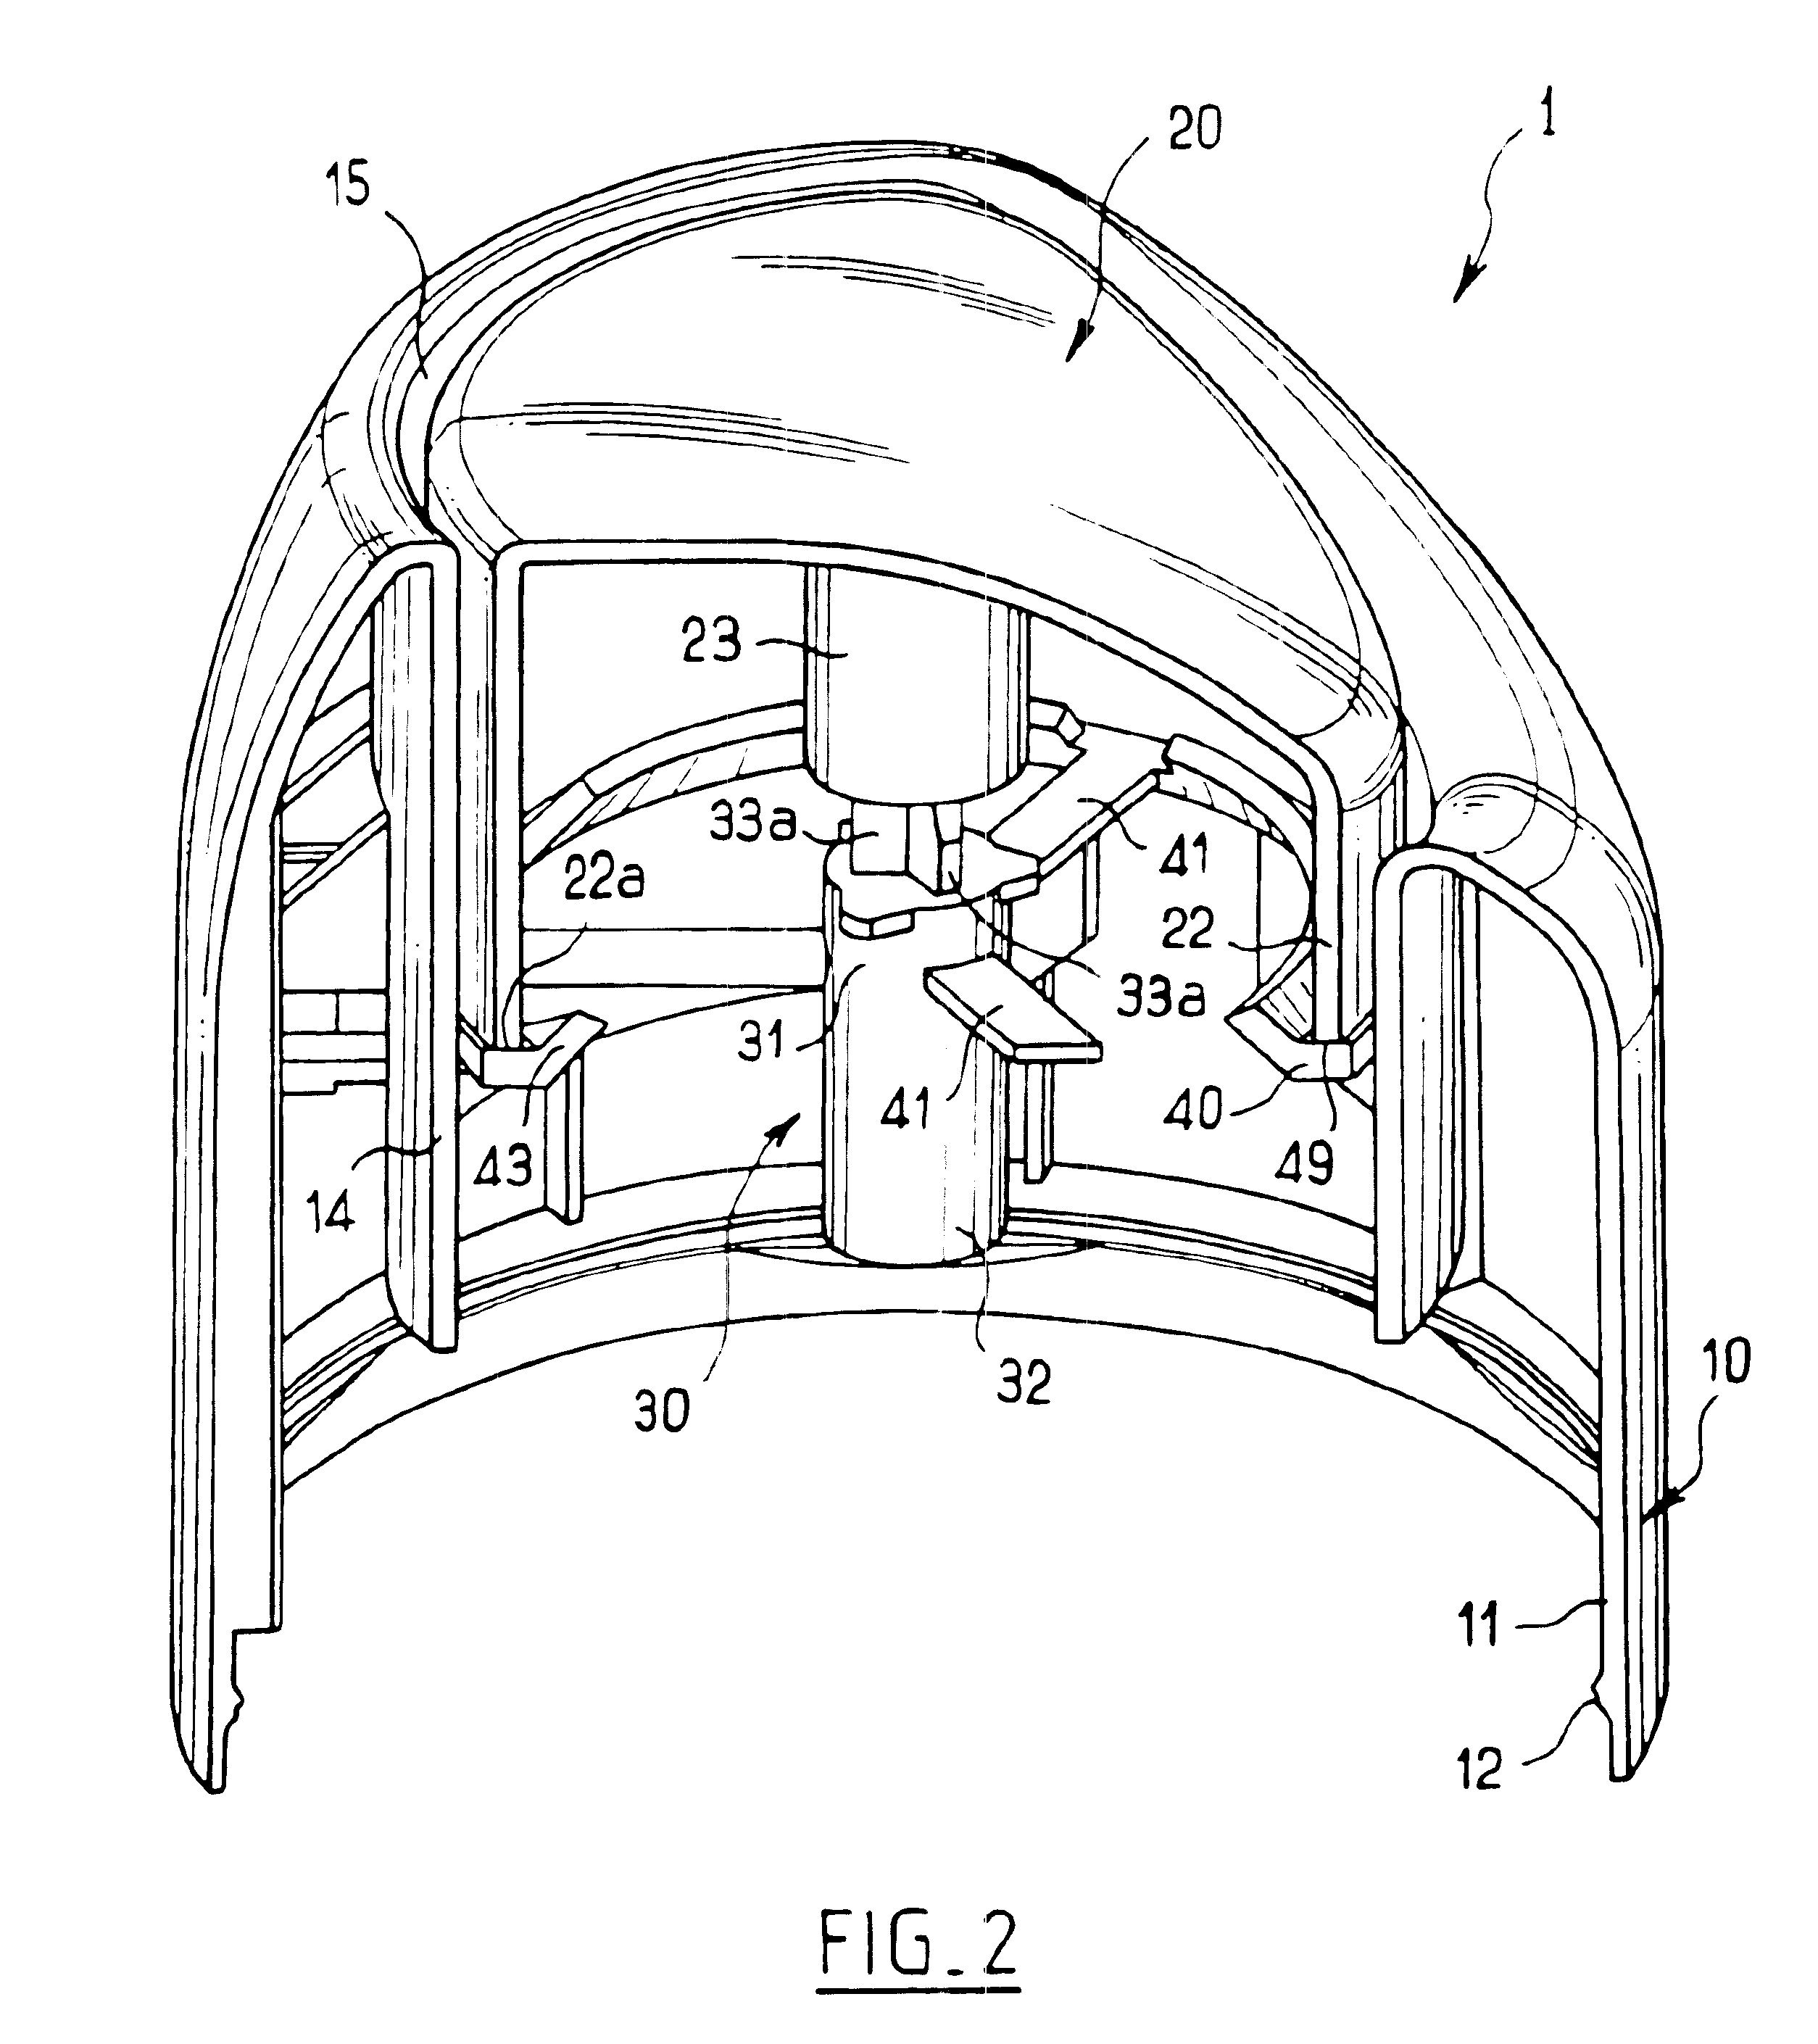 Dispenser device for fitting to a receptacle provided with a valve